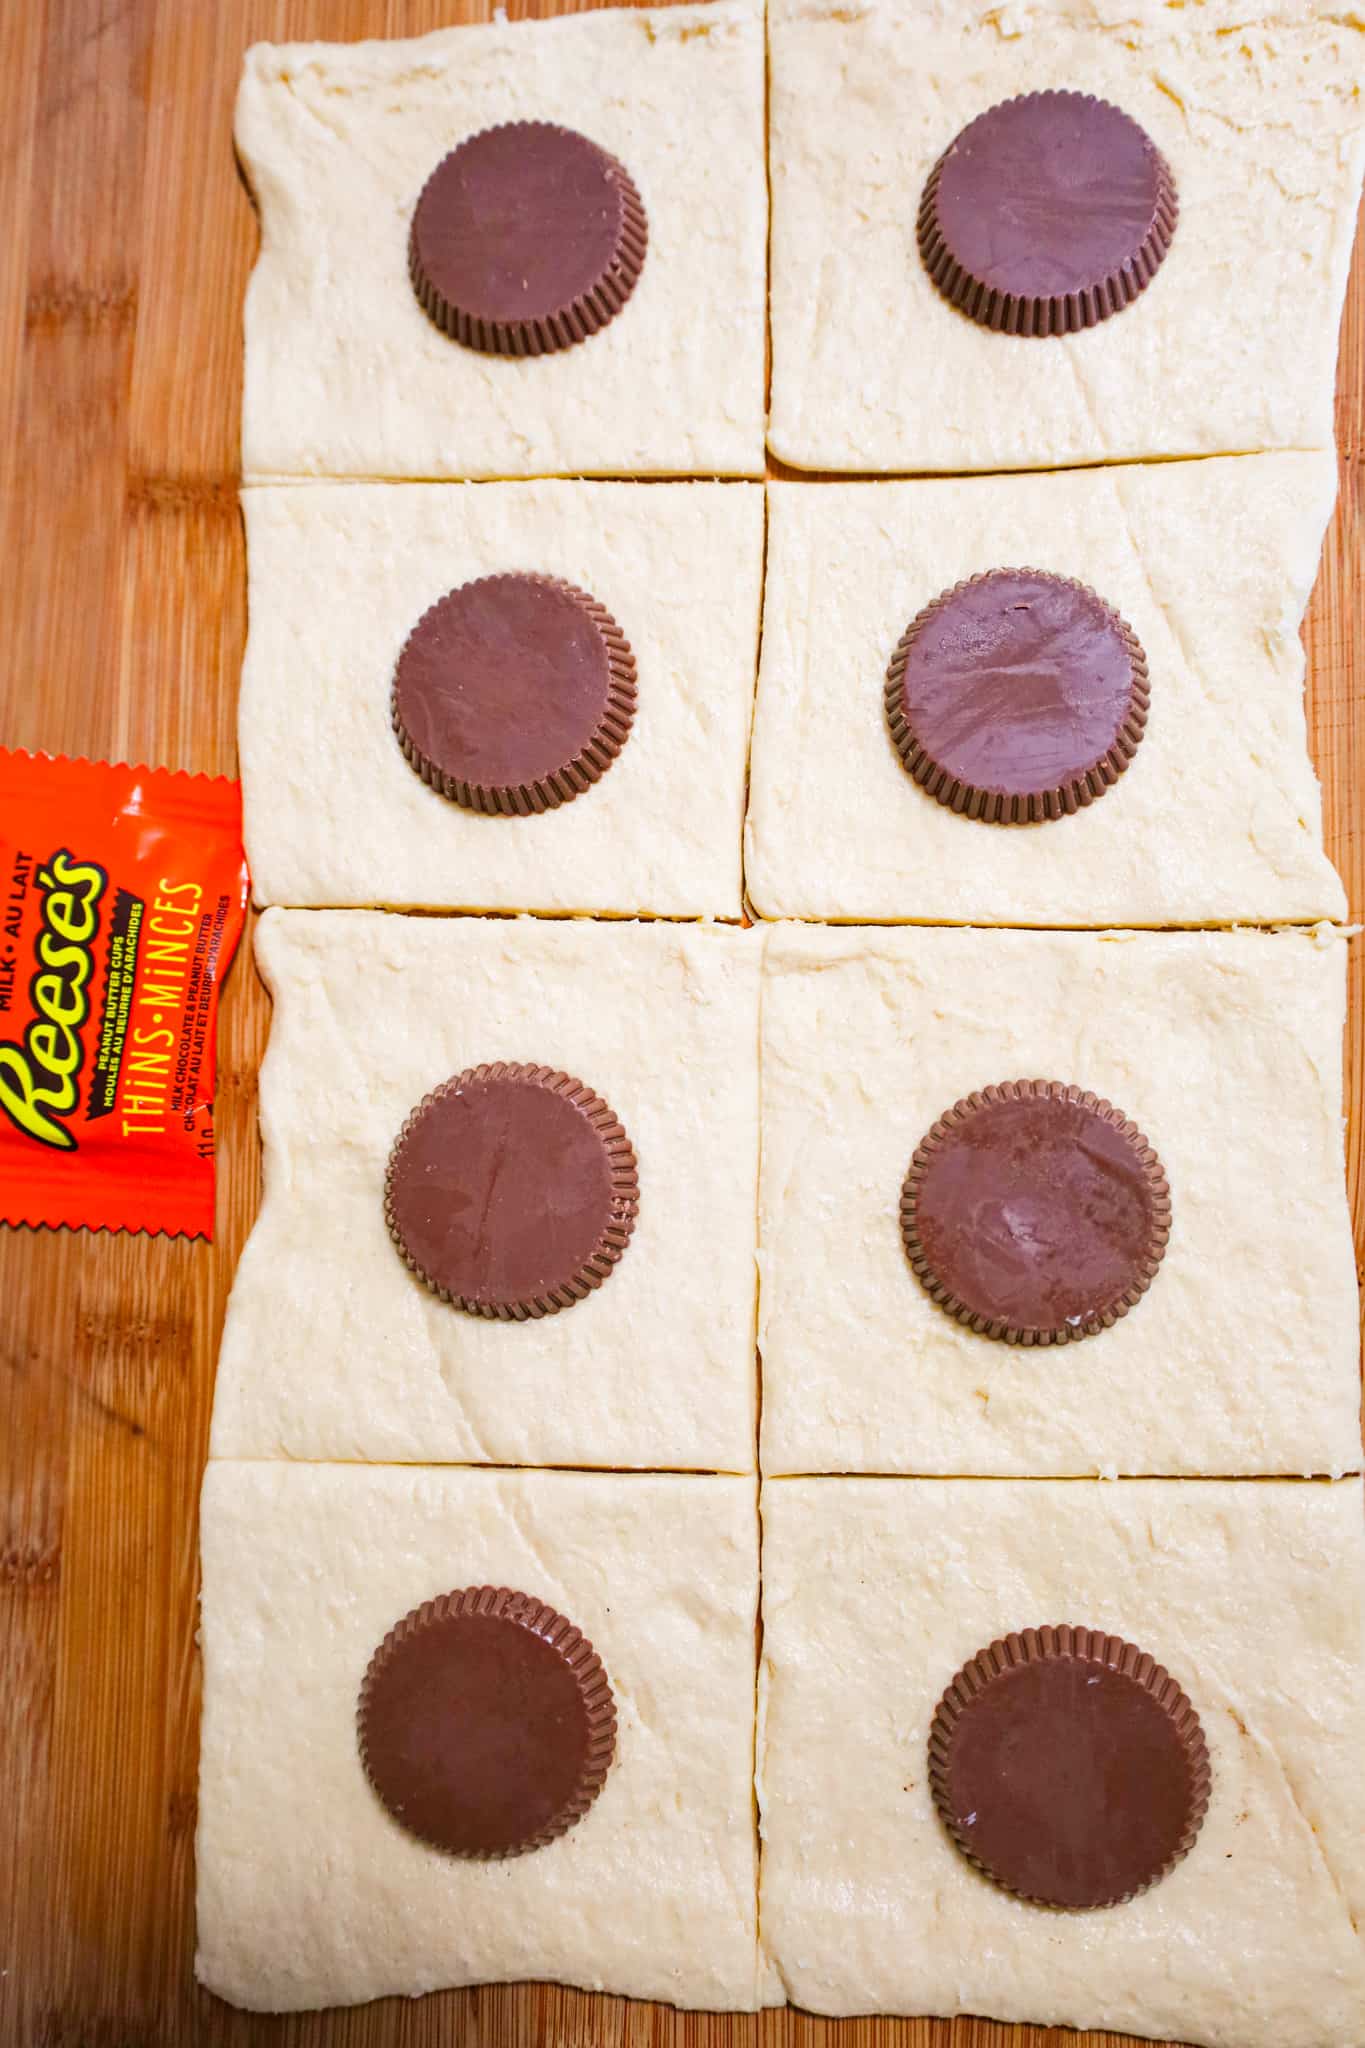 Reese's peanut butter cup thins on top of squares of Pillsbury crescent roll dough